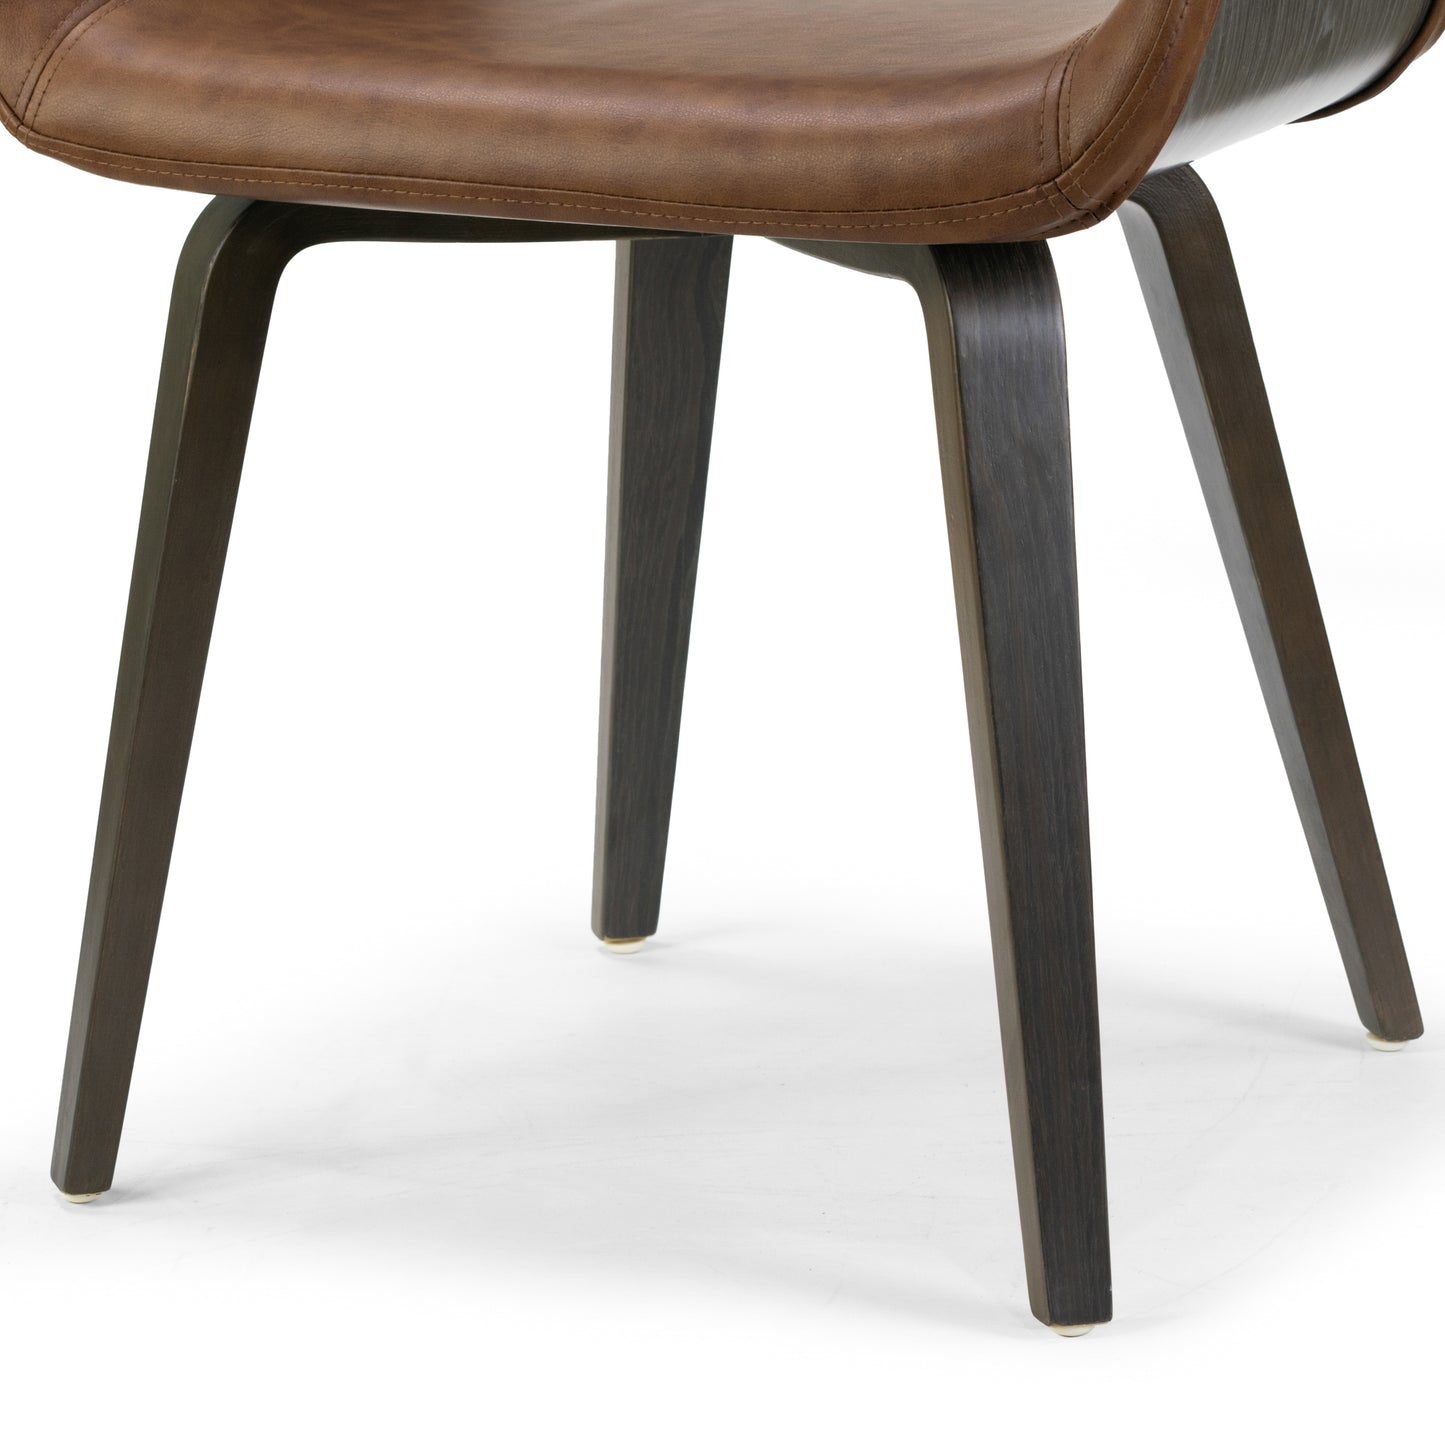 Amal Brown Upholstered Dining Chair with Grey Wood Accent and Bentwood Legs